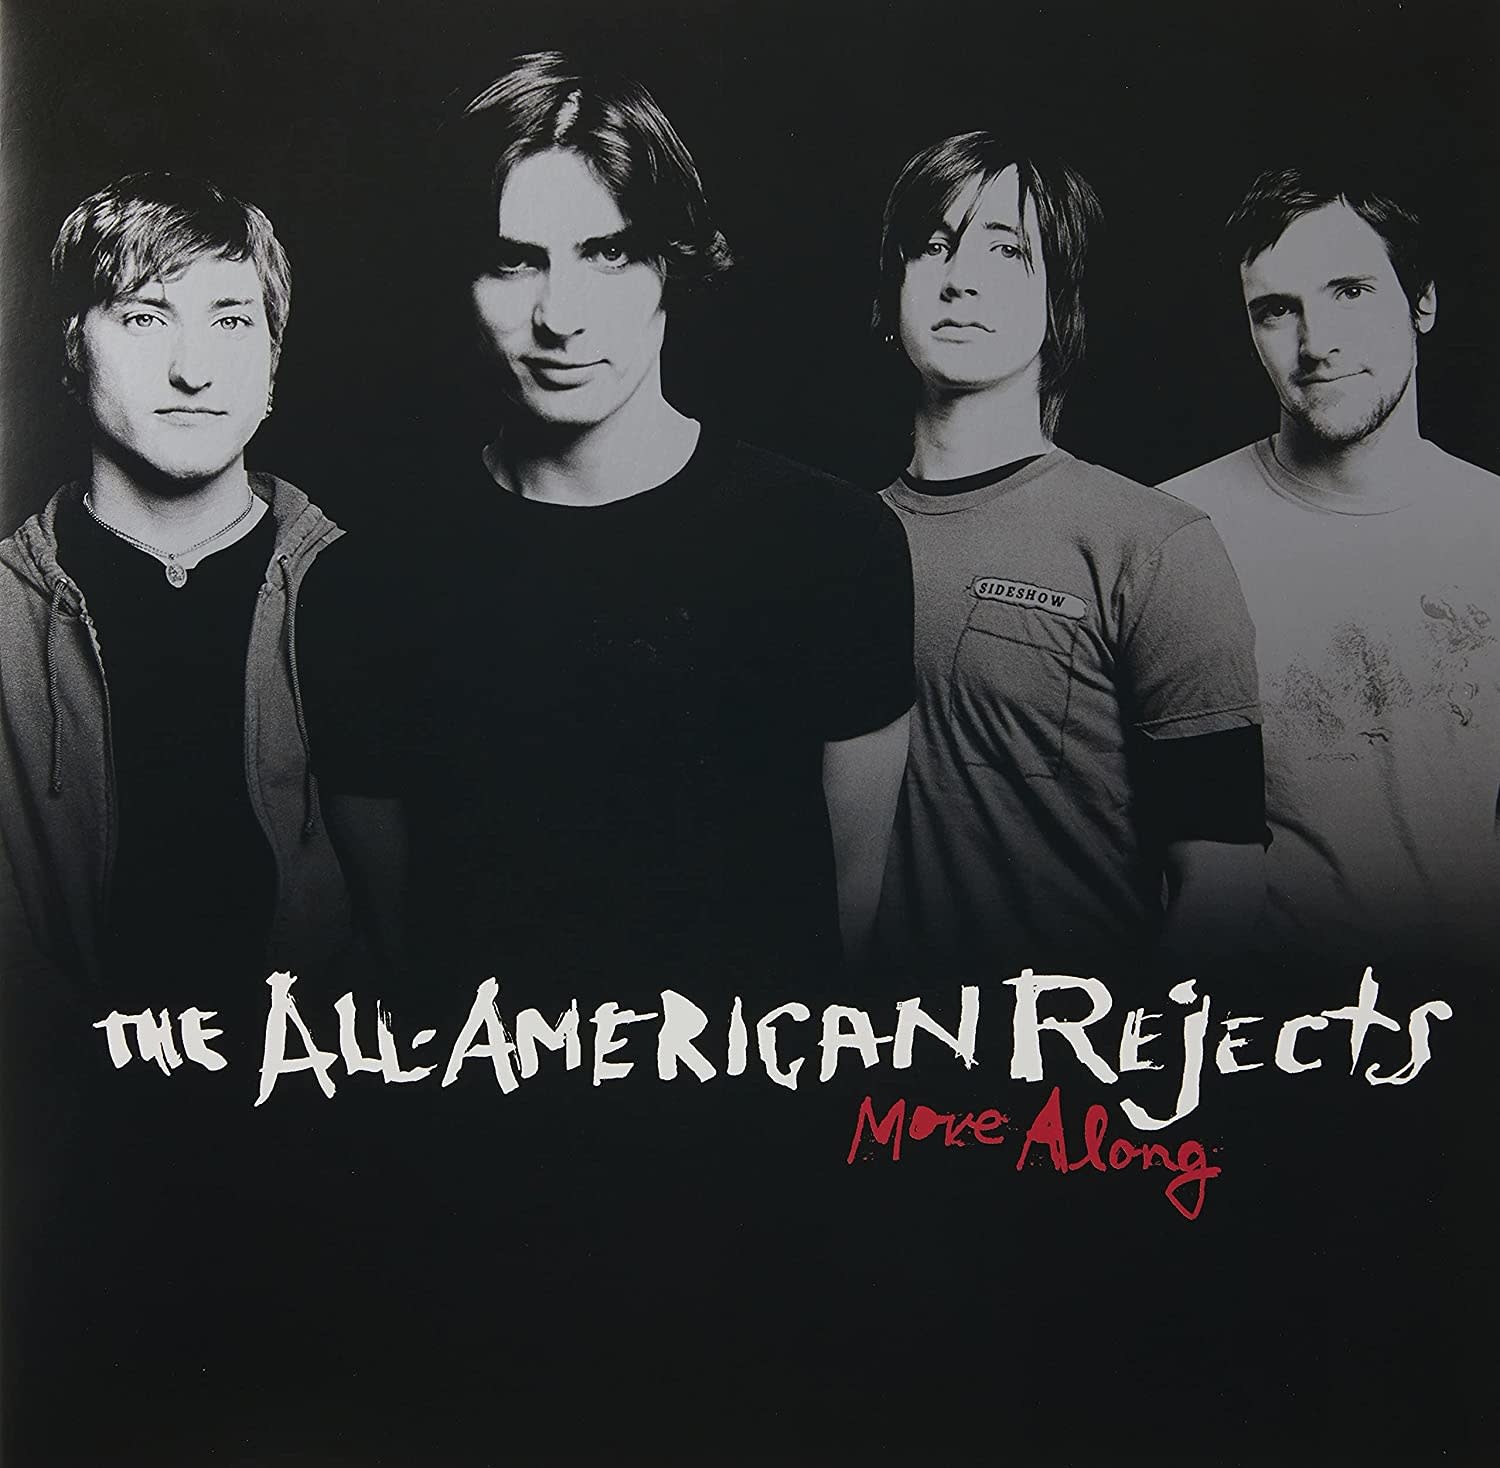 All-American Rejects – Move Along